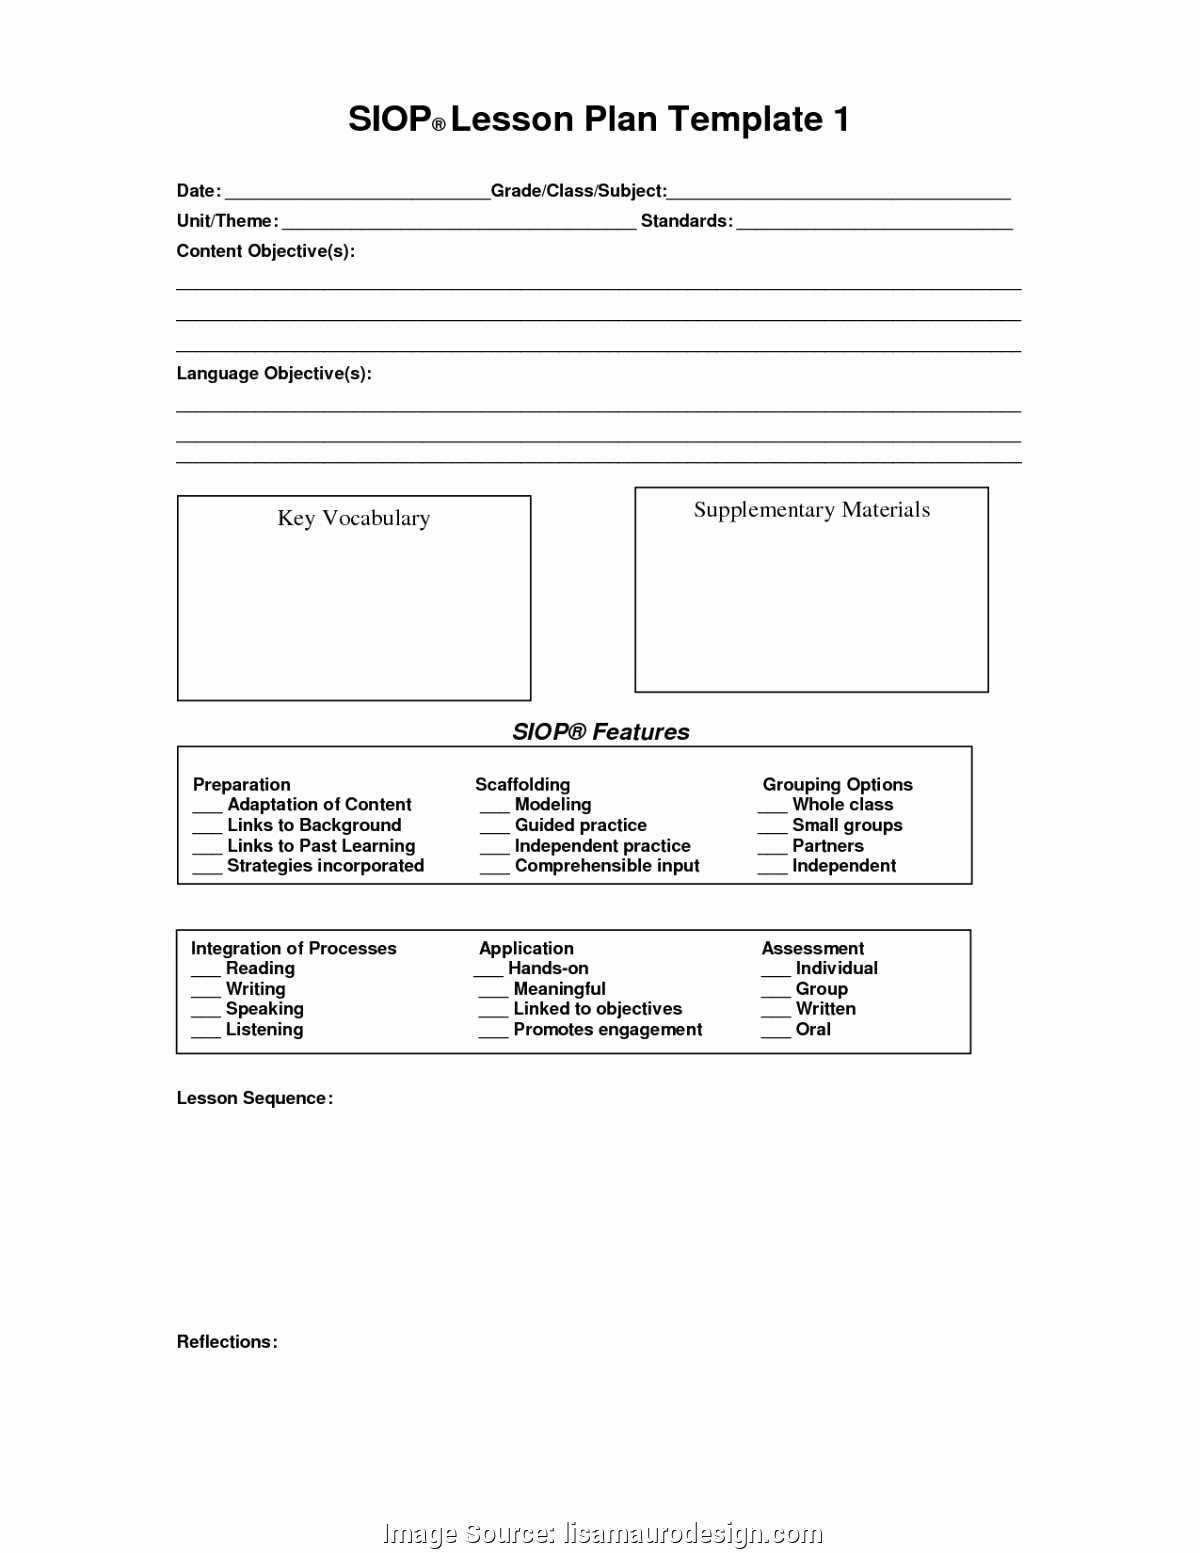 Siop Lesson Plan Template Unique Good Guided Reading Activity Lesson 1 Guided Reading